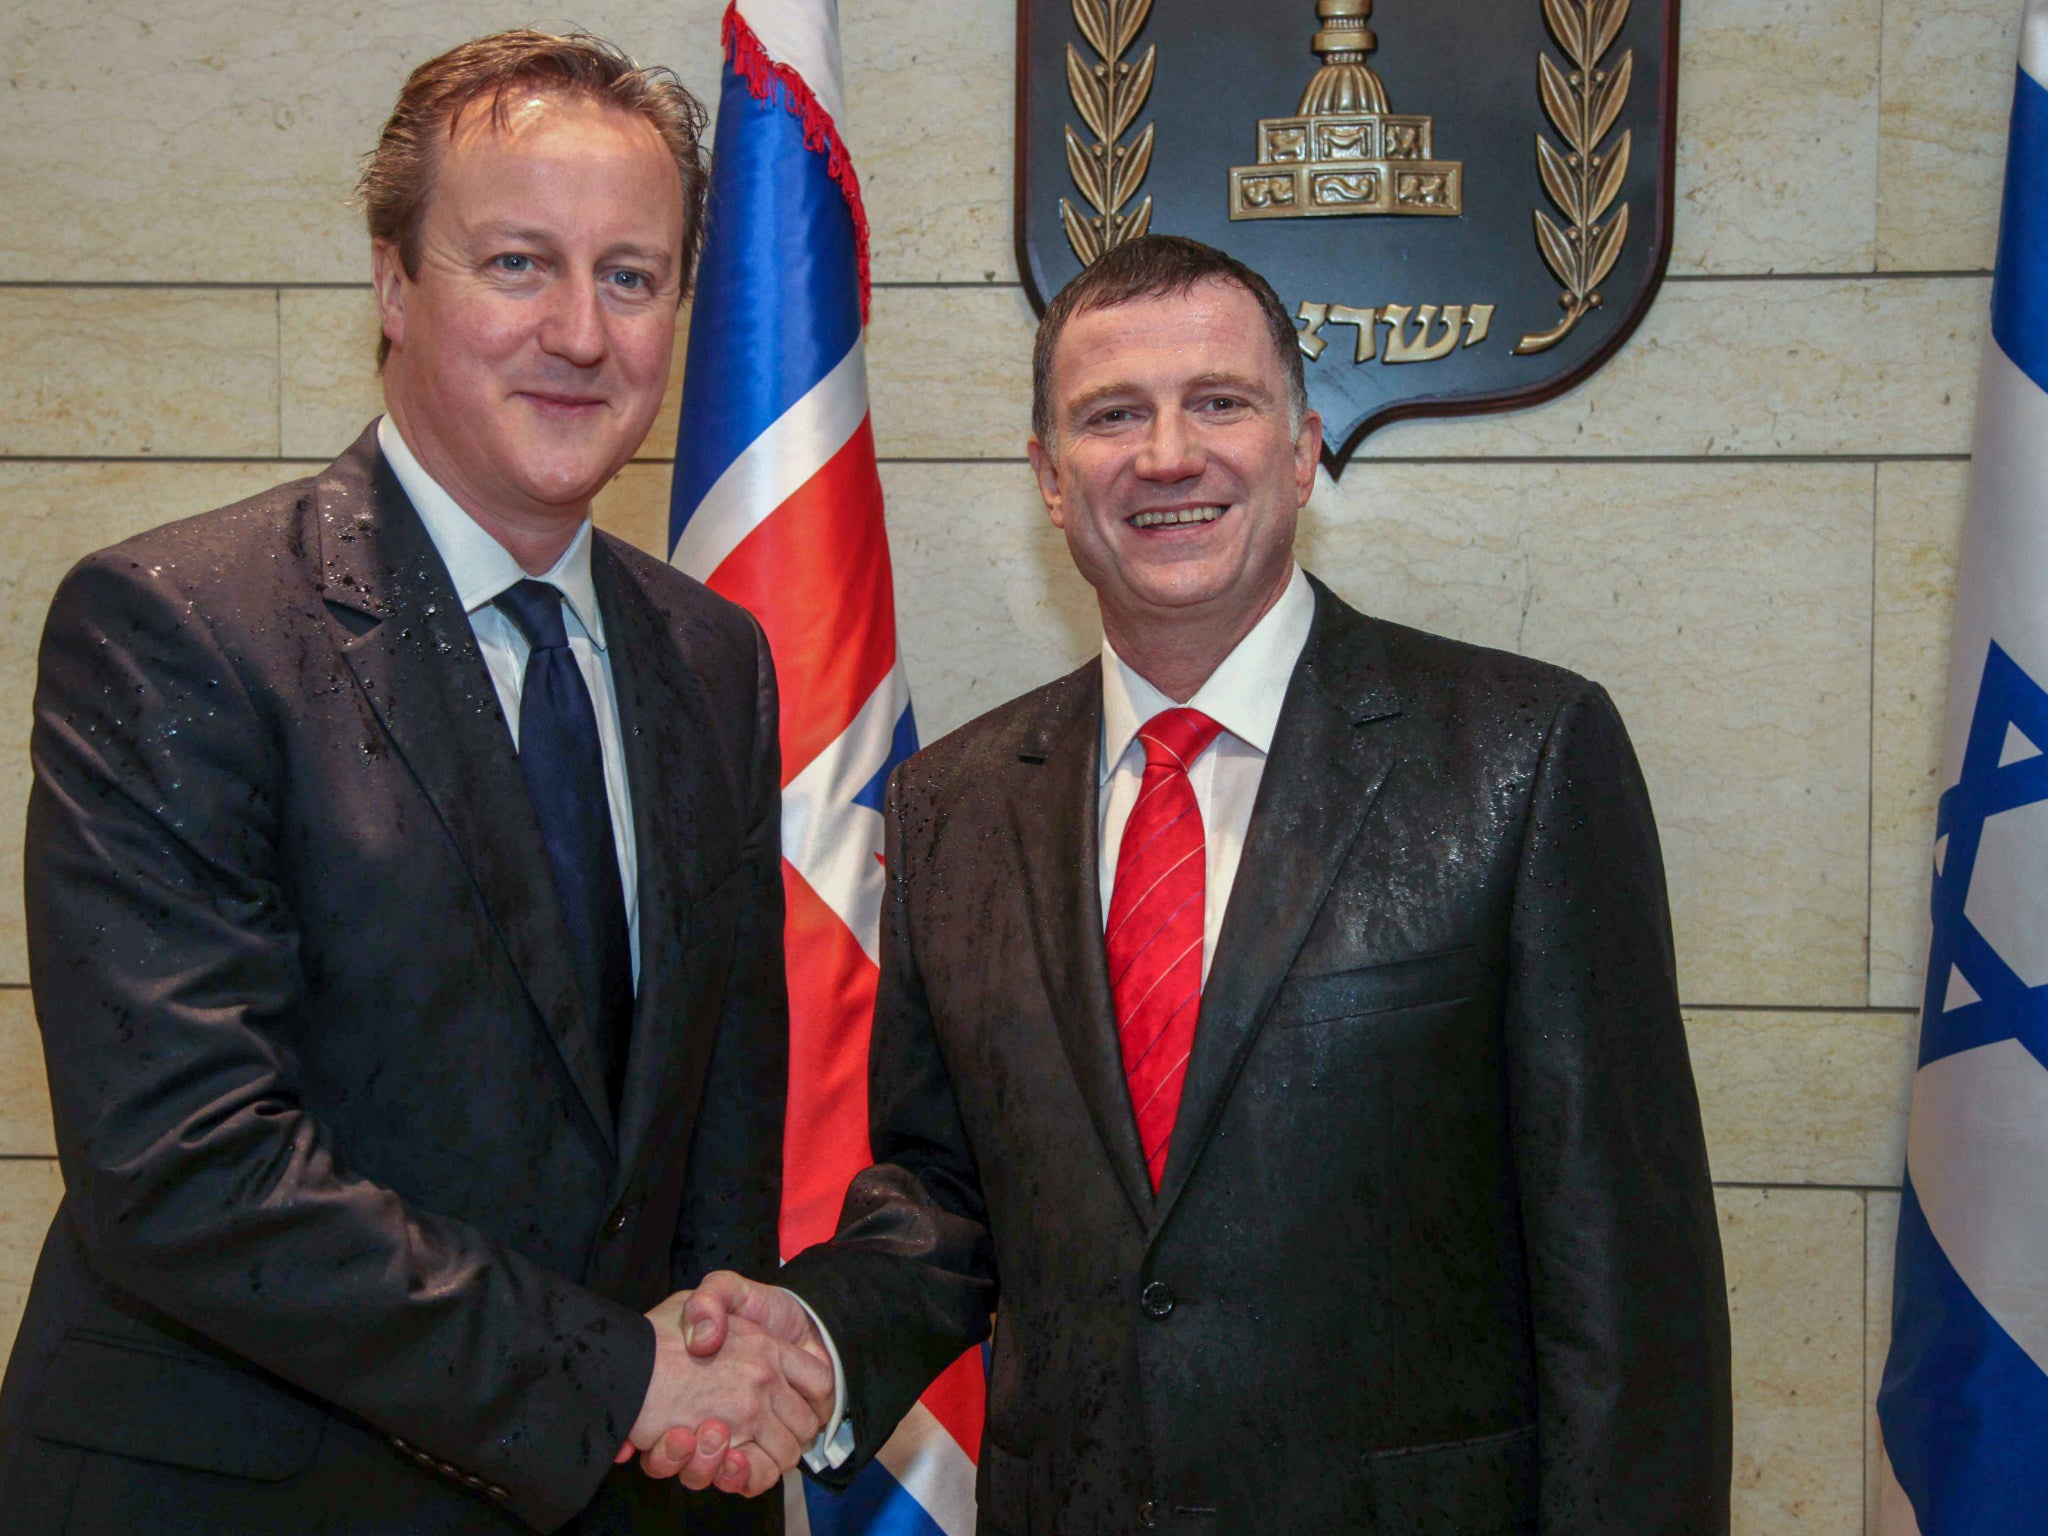 David Cameron is welcomed the speaker of the Knesset Yuli-Yoel Edelstein during his visit to Israel in March 2015